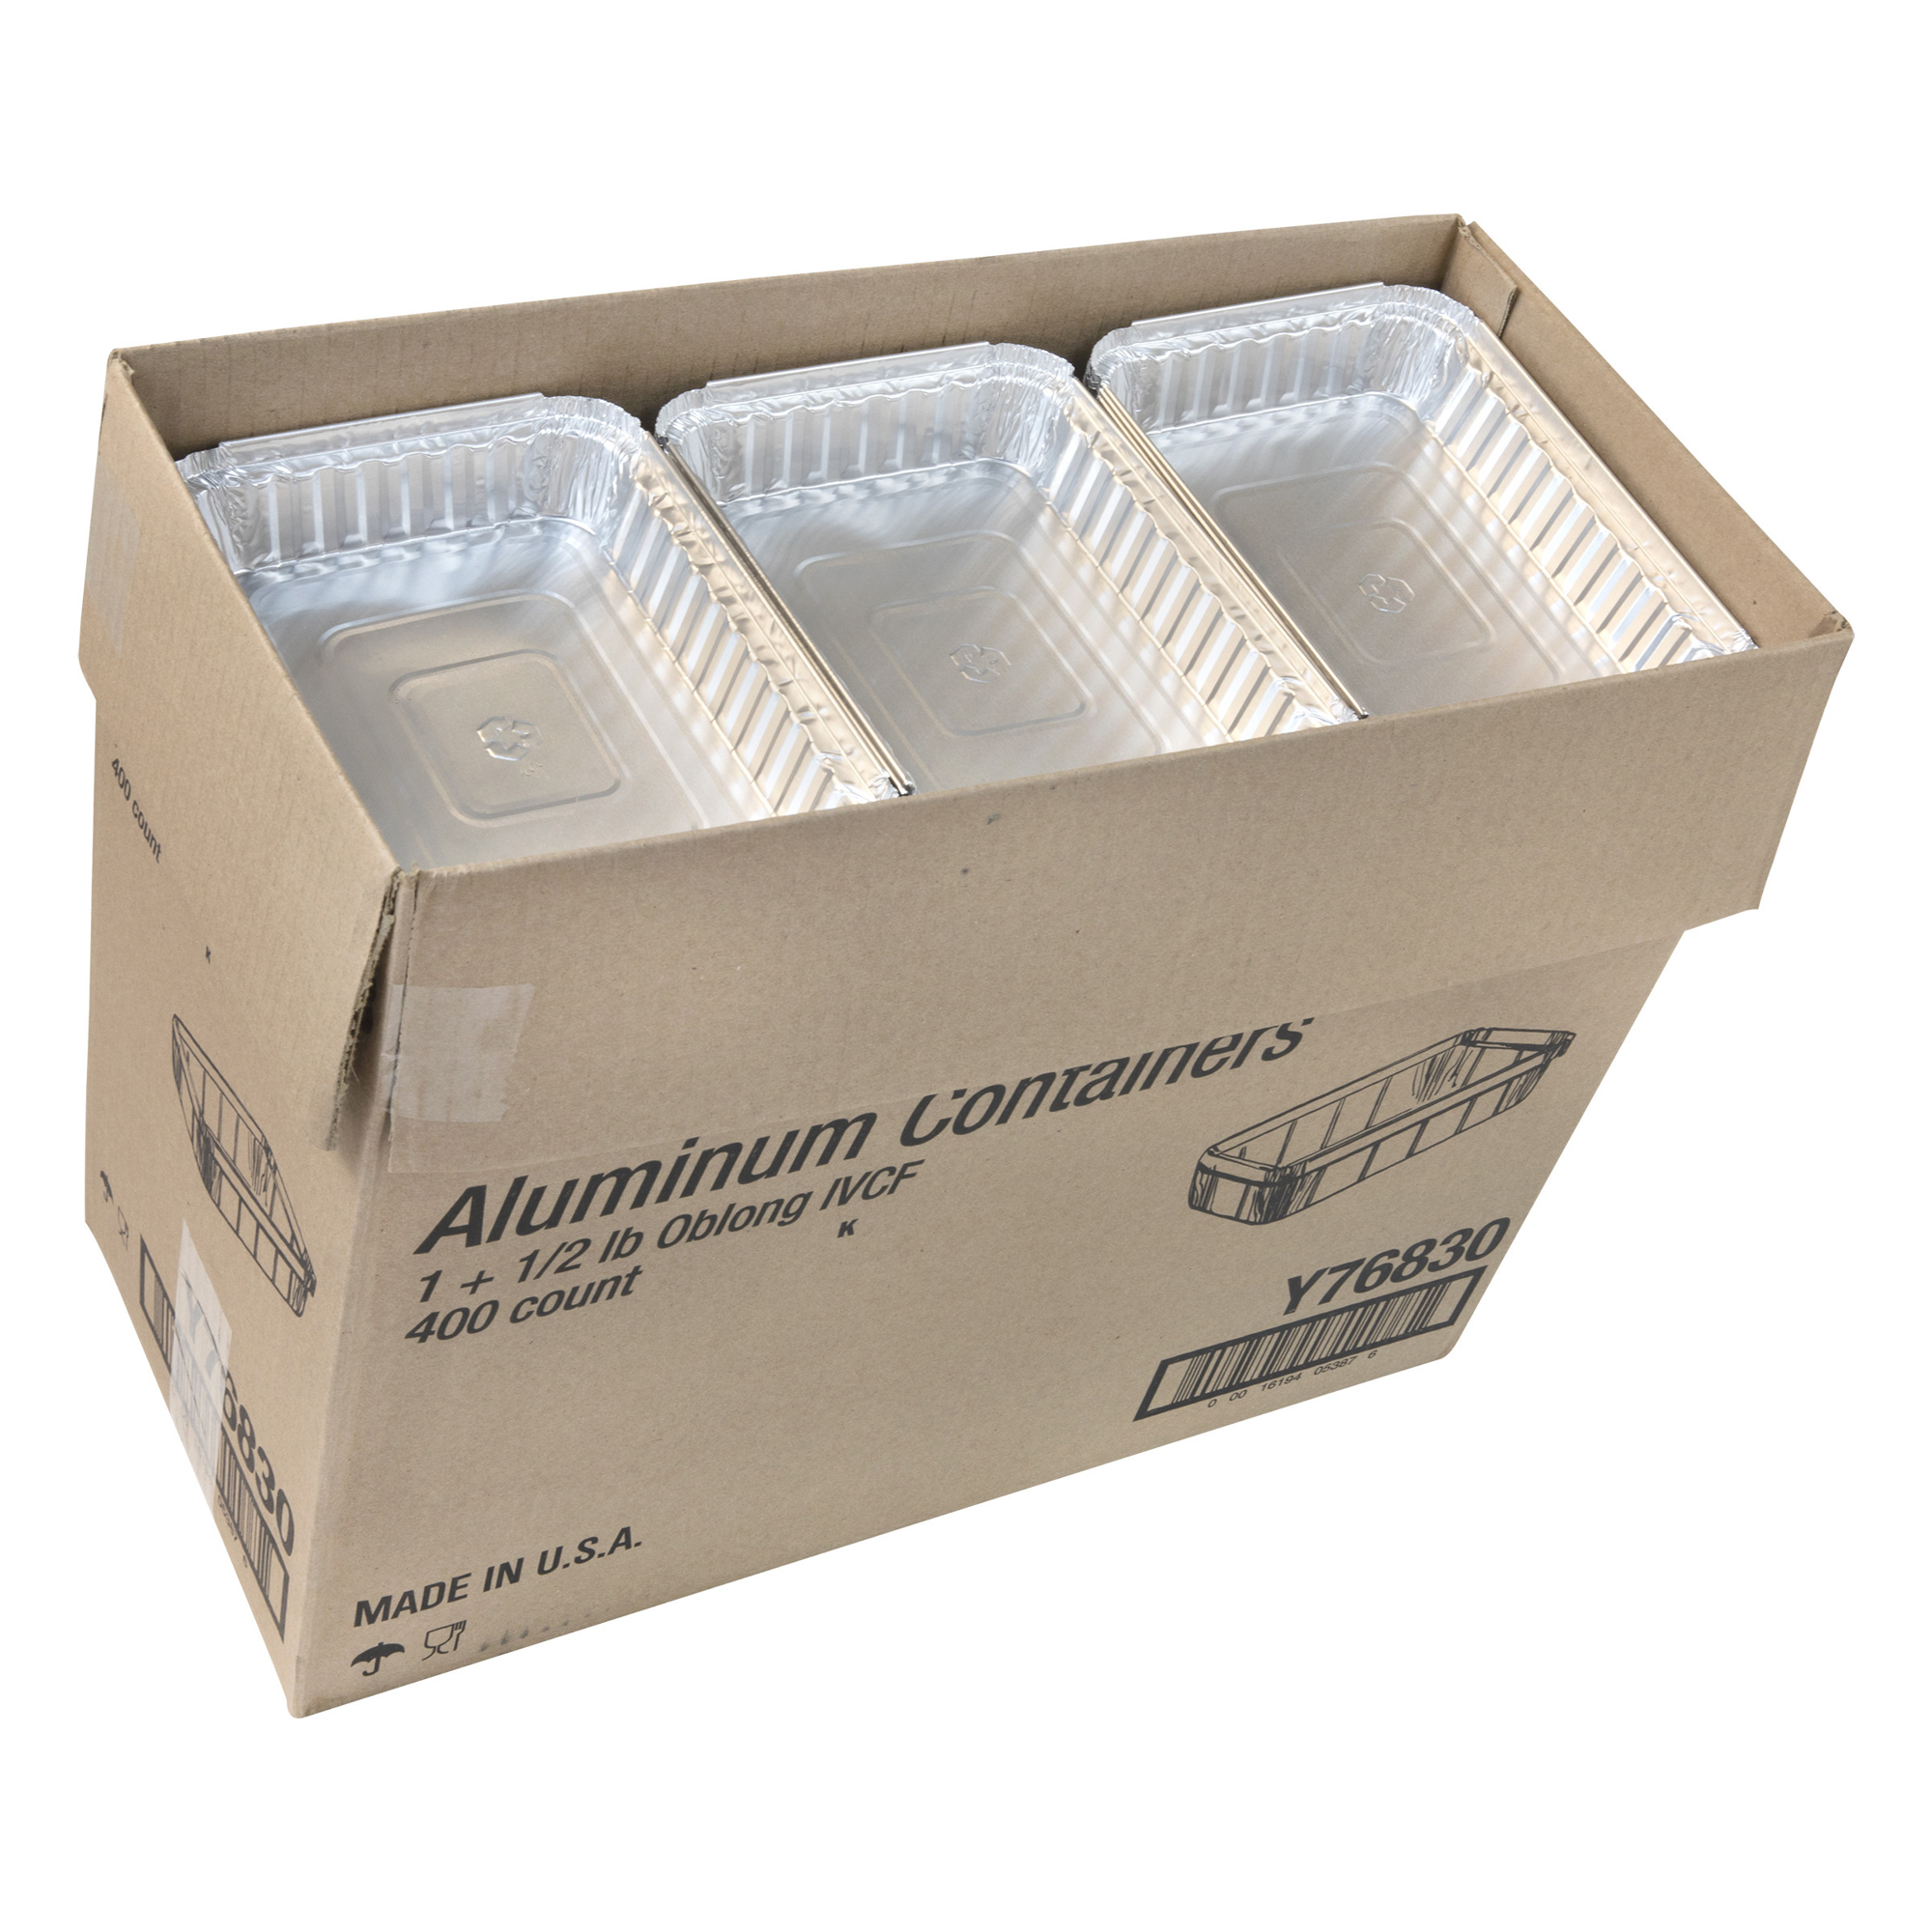 Aluminum Foil Take-Out Containers - 9 x 6 - ULINE - Carton of 250 - S-25388